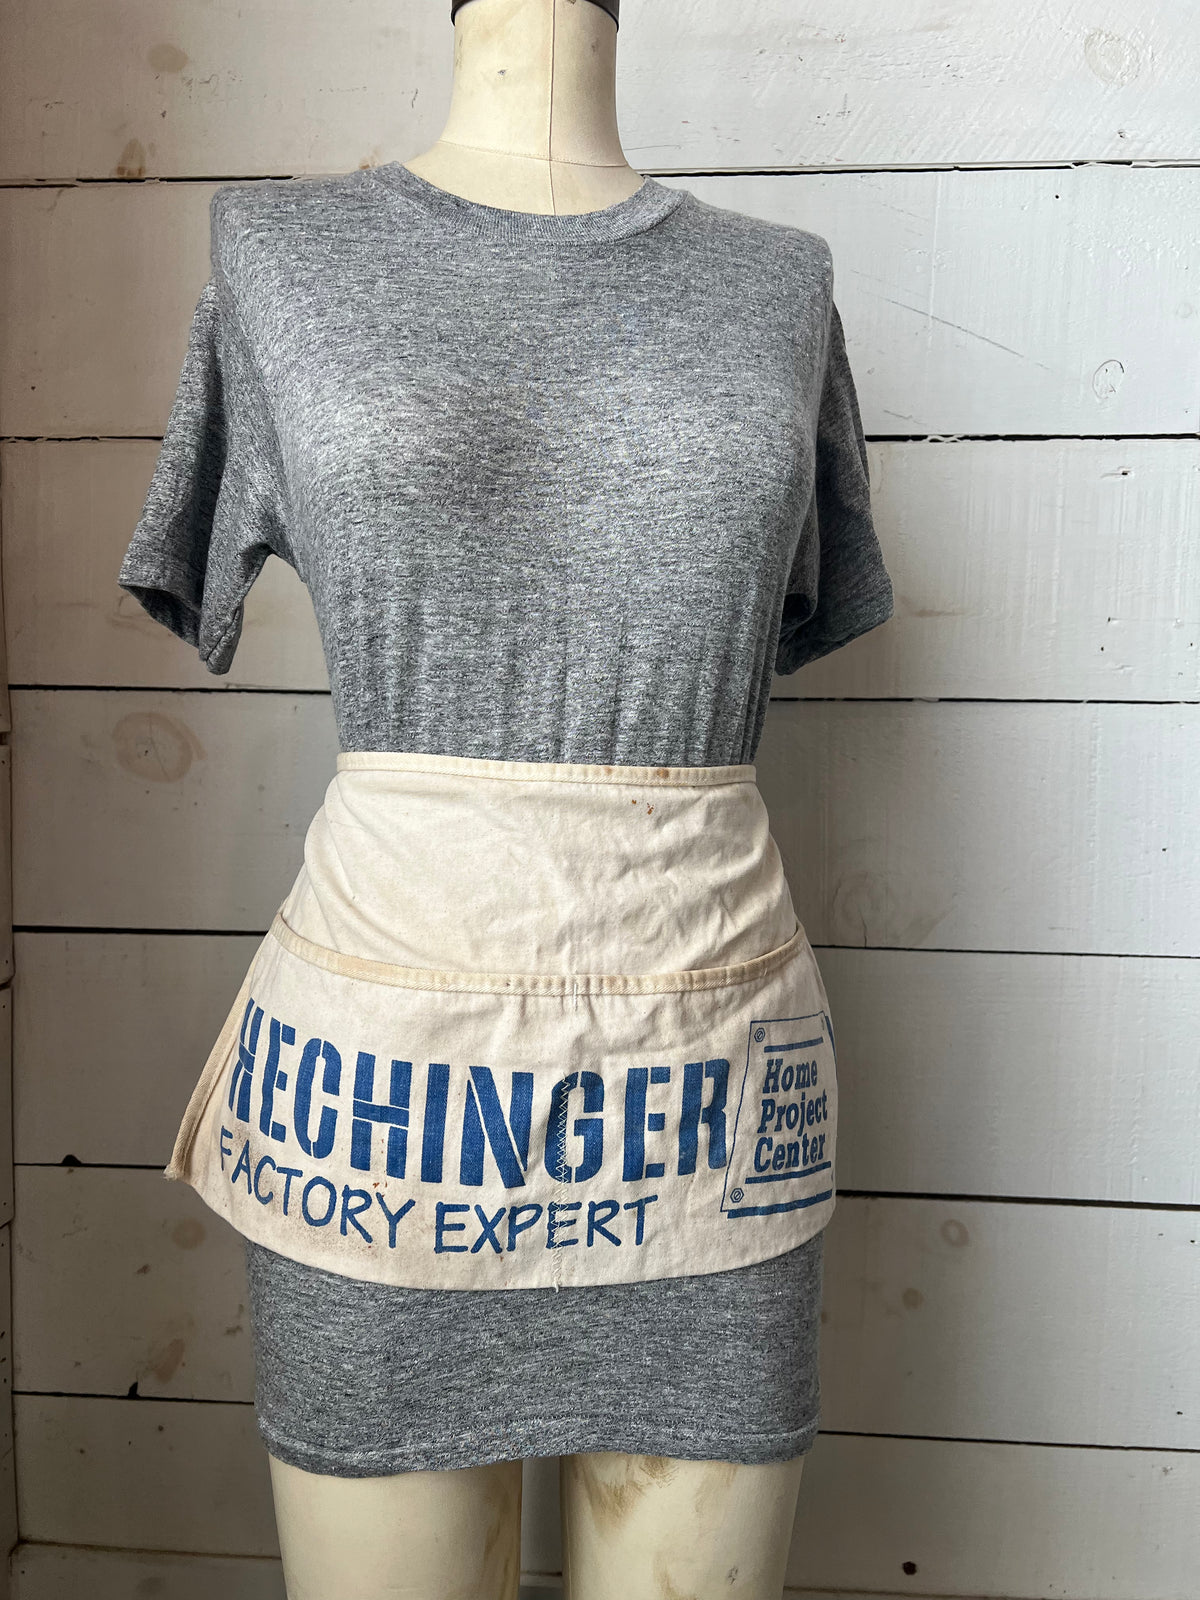 Vintage Hechinger Factory Expert Apron